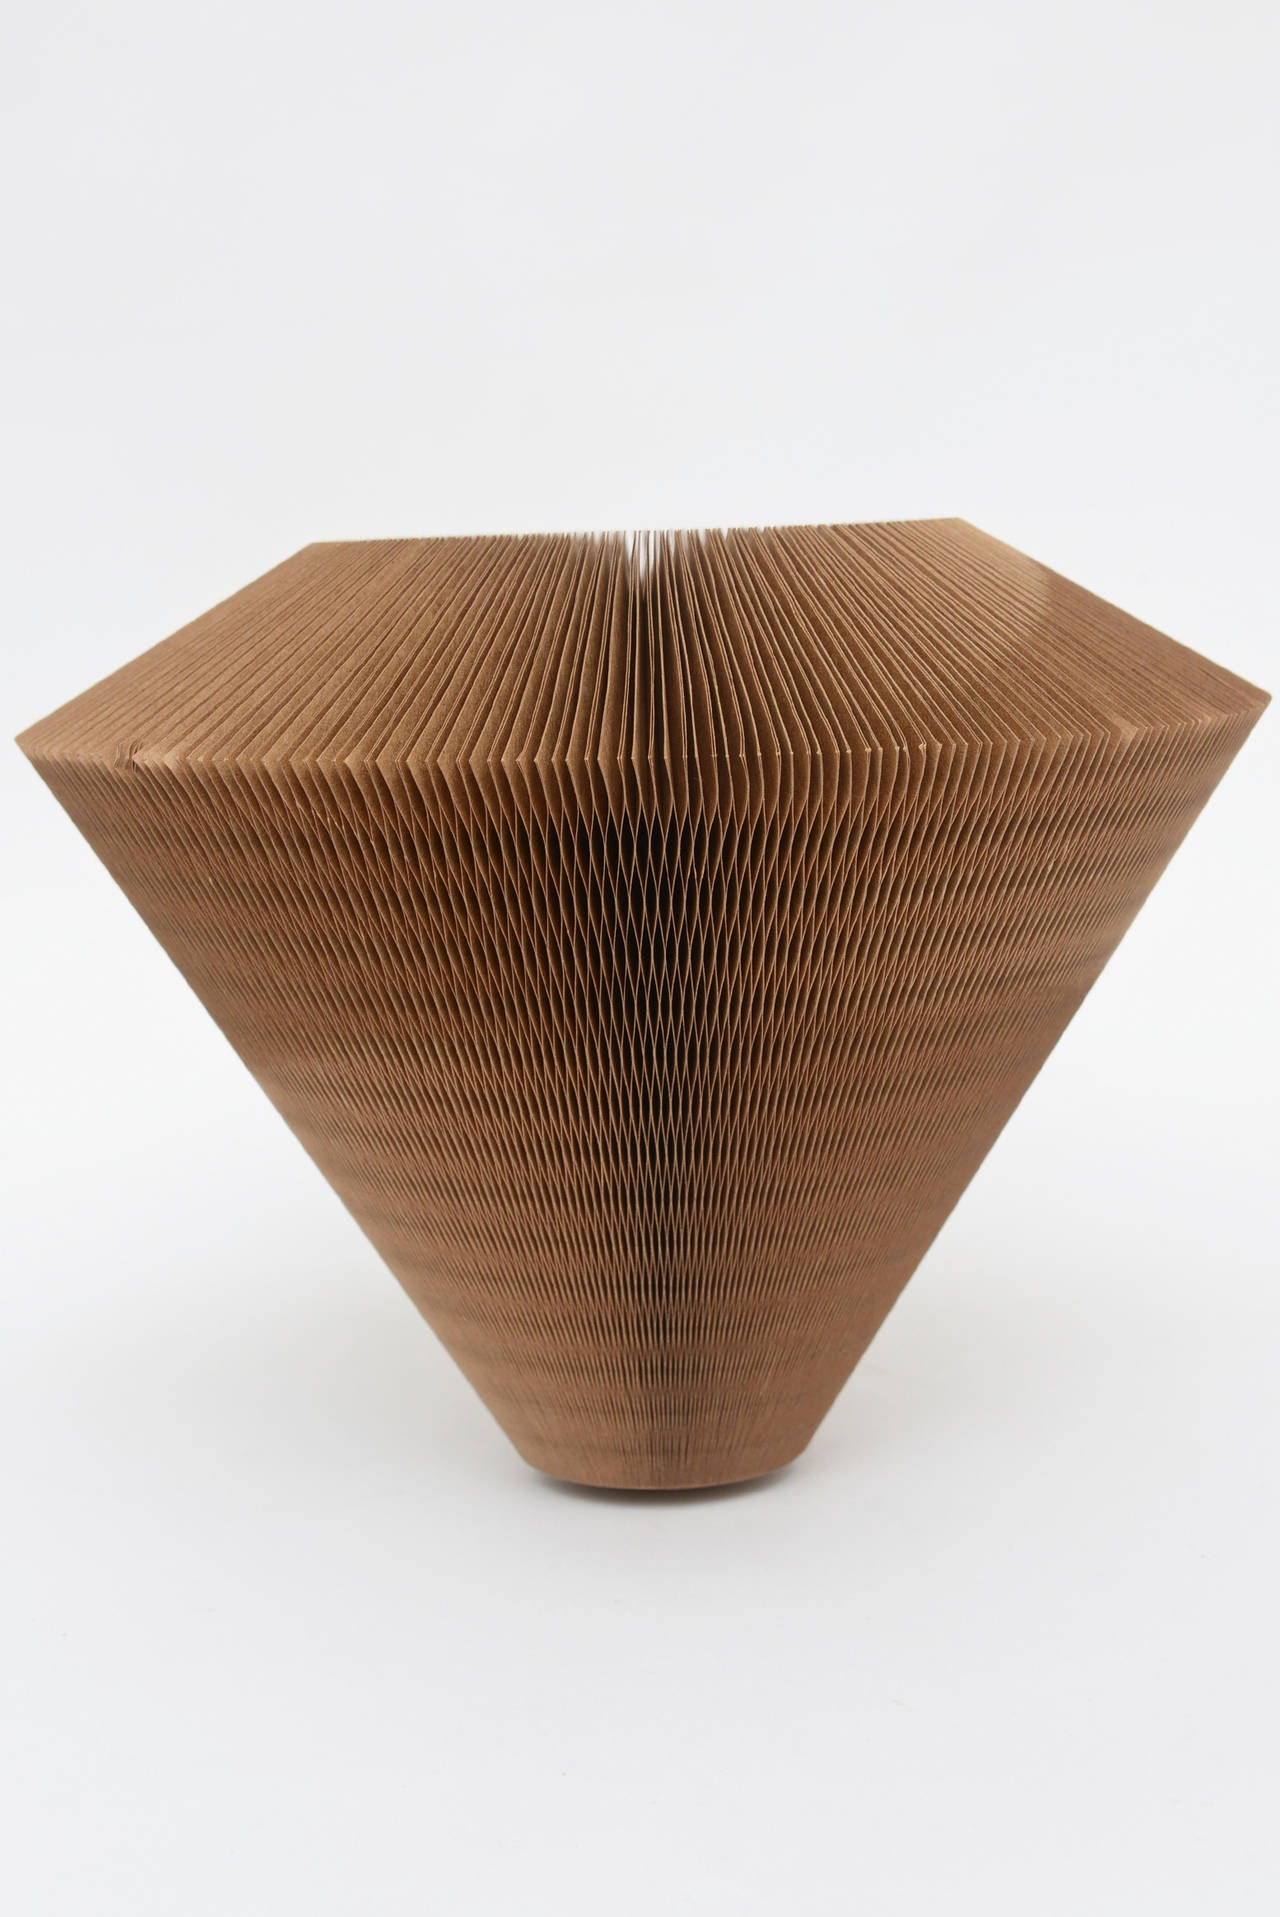 Mid-20th Century  Frank Gehry Corrugated Period Cardboard Two-Position Folded Sculpture